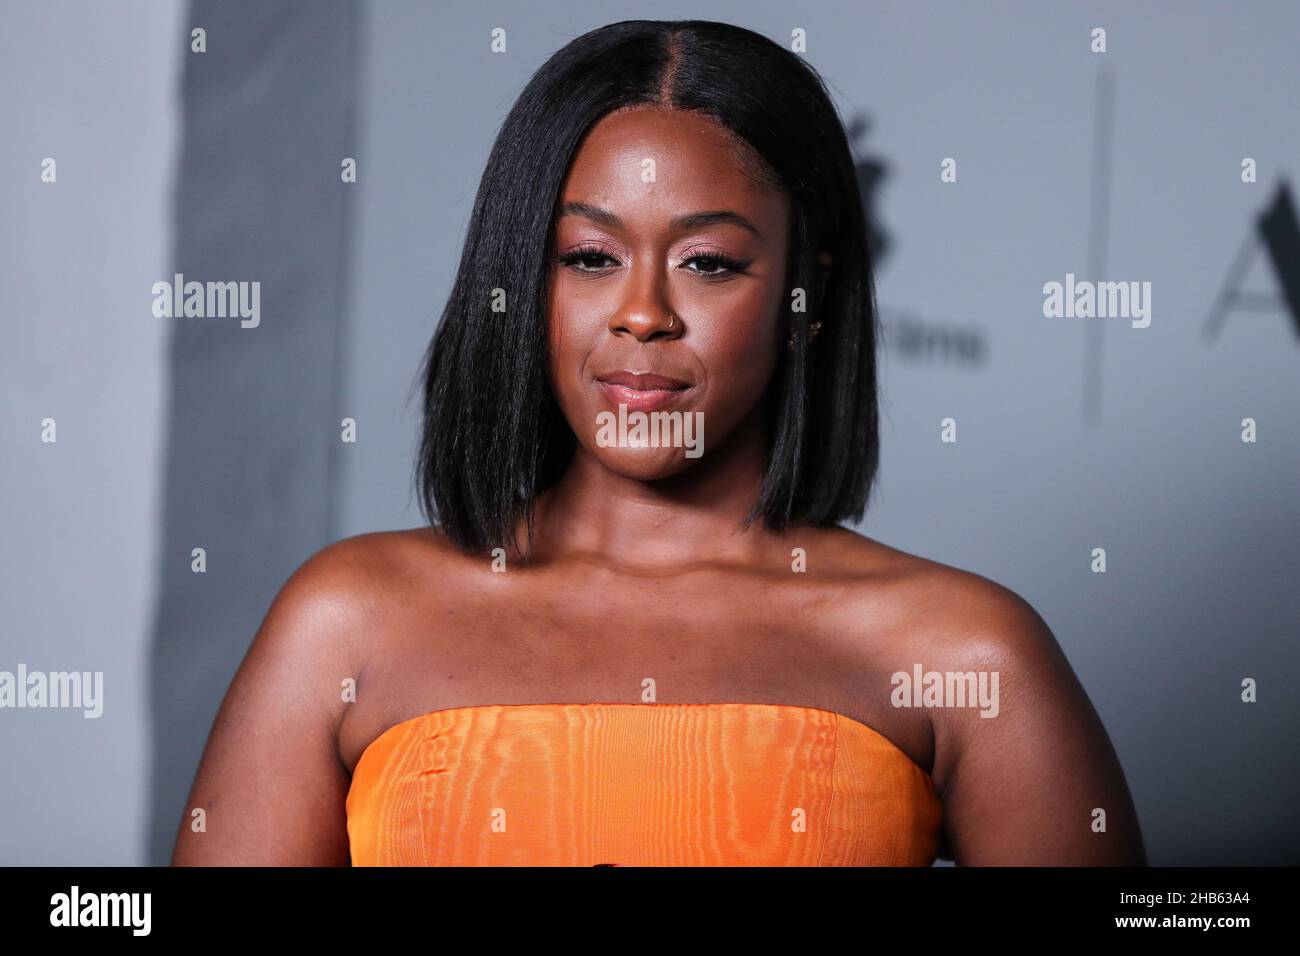 Los Angeles, USA. 16th Dec, 2021. LOS ANGELES, CALIFORNIA, USA - DECEMBER  16: American actress Moses Ingram arrives at the Los Angeles Premiere Of  Apple Original Films' and A24's 'The Tragedy Of